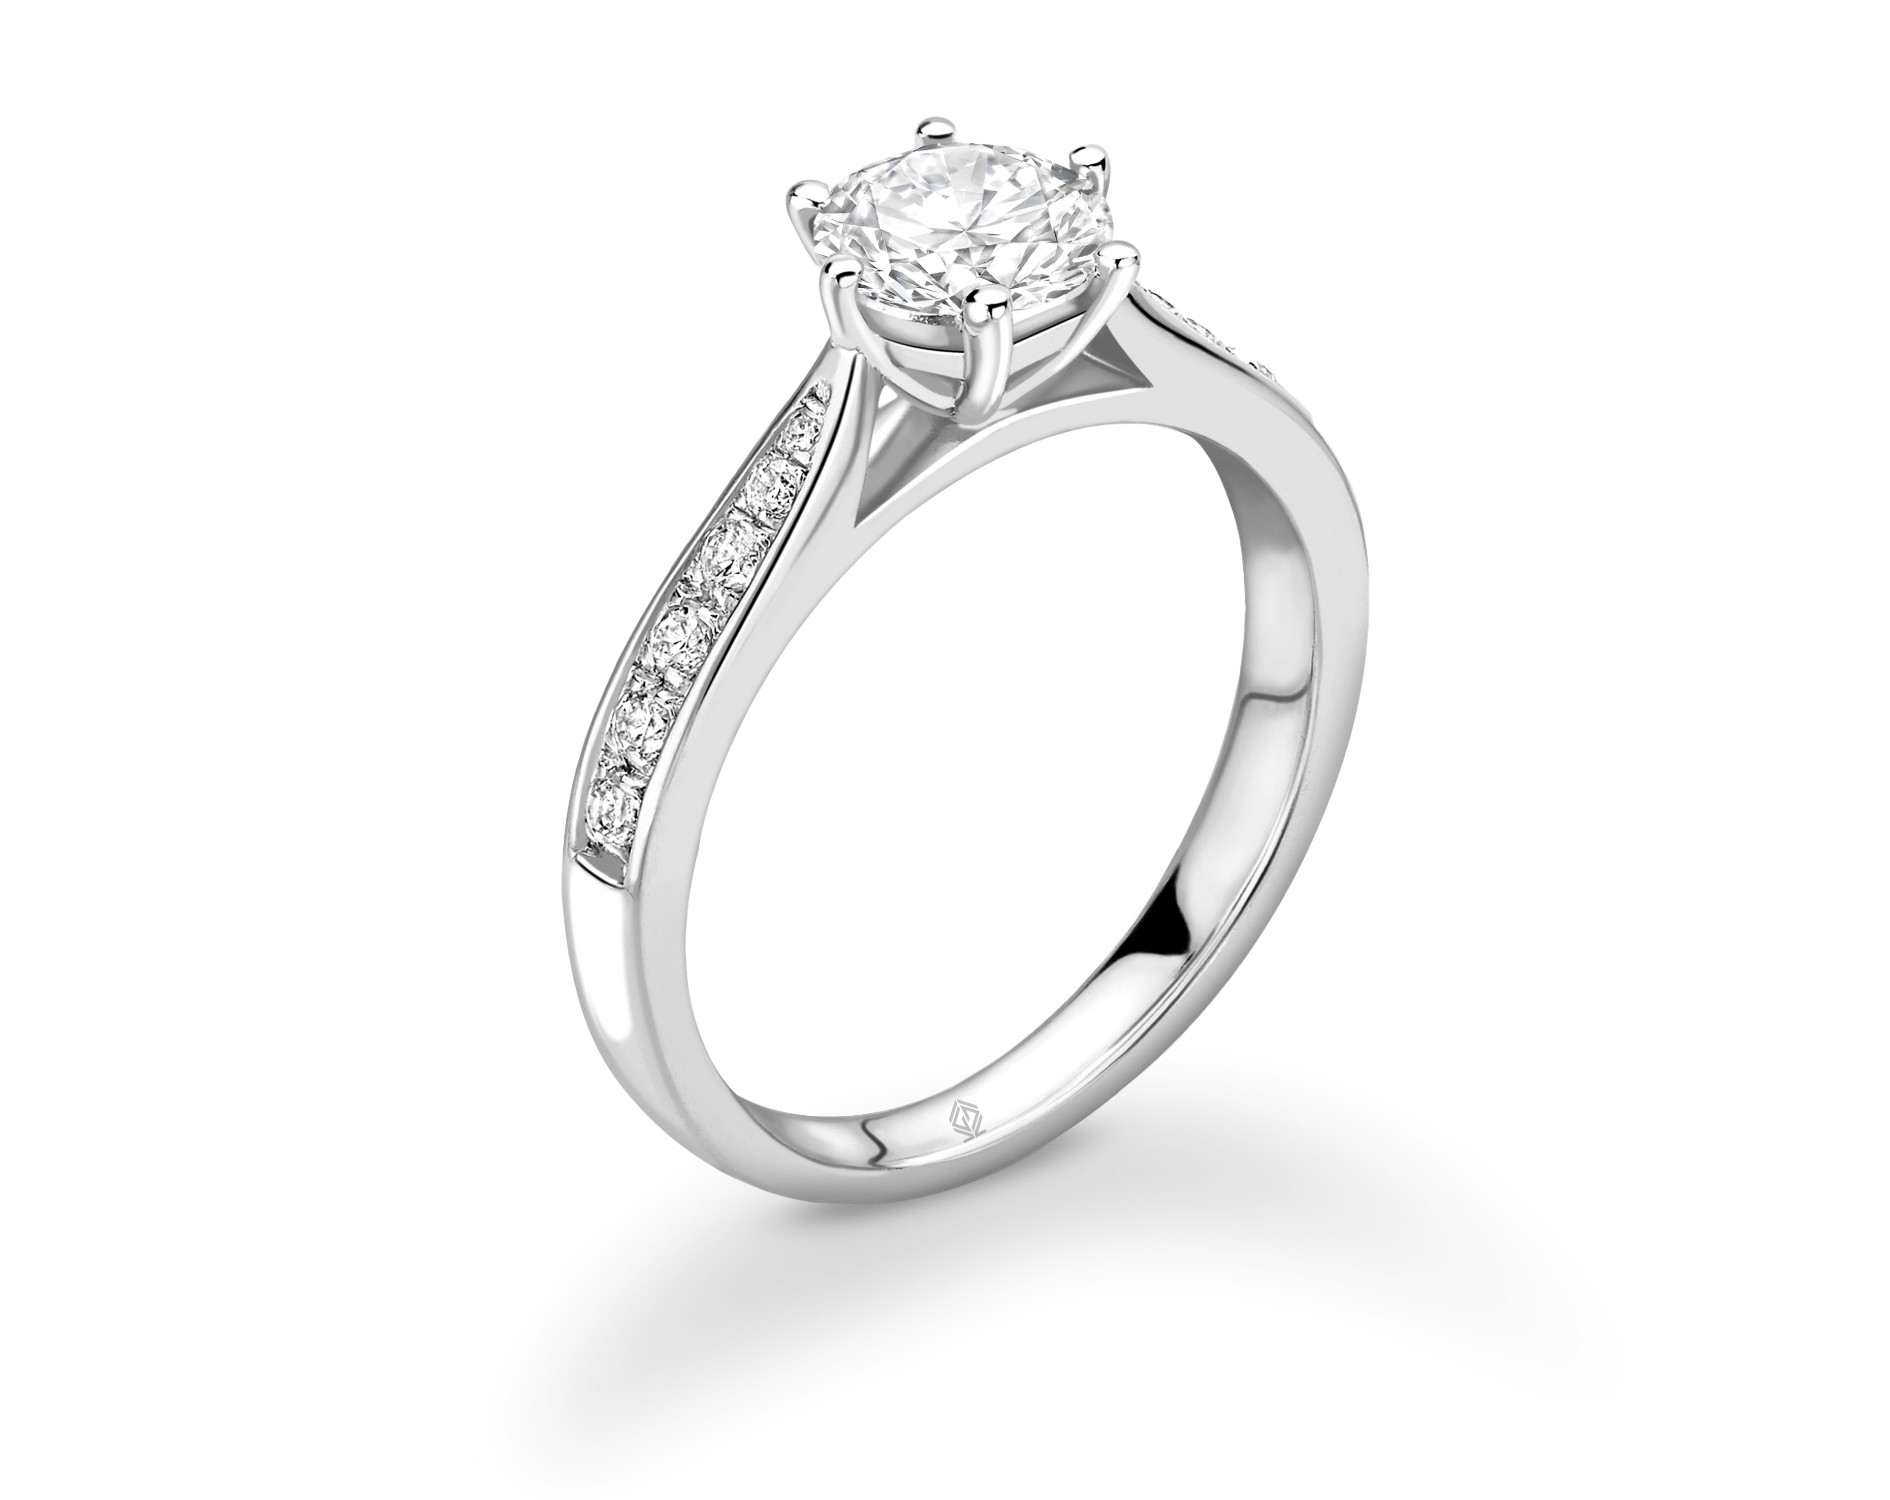 18K WHITE GOLD 6 PRONGS ROUND CUT DIAMOND ENGAGEMENT RING WITH SIDE STONES CHANNEL SET